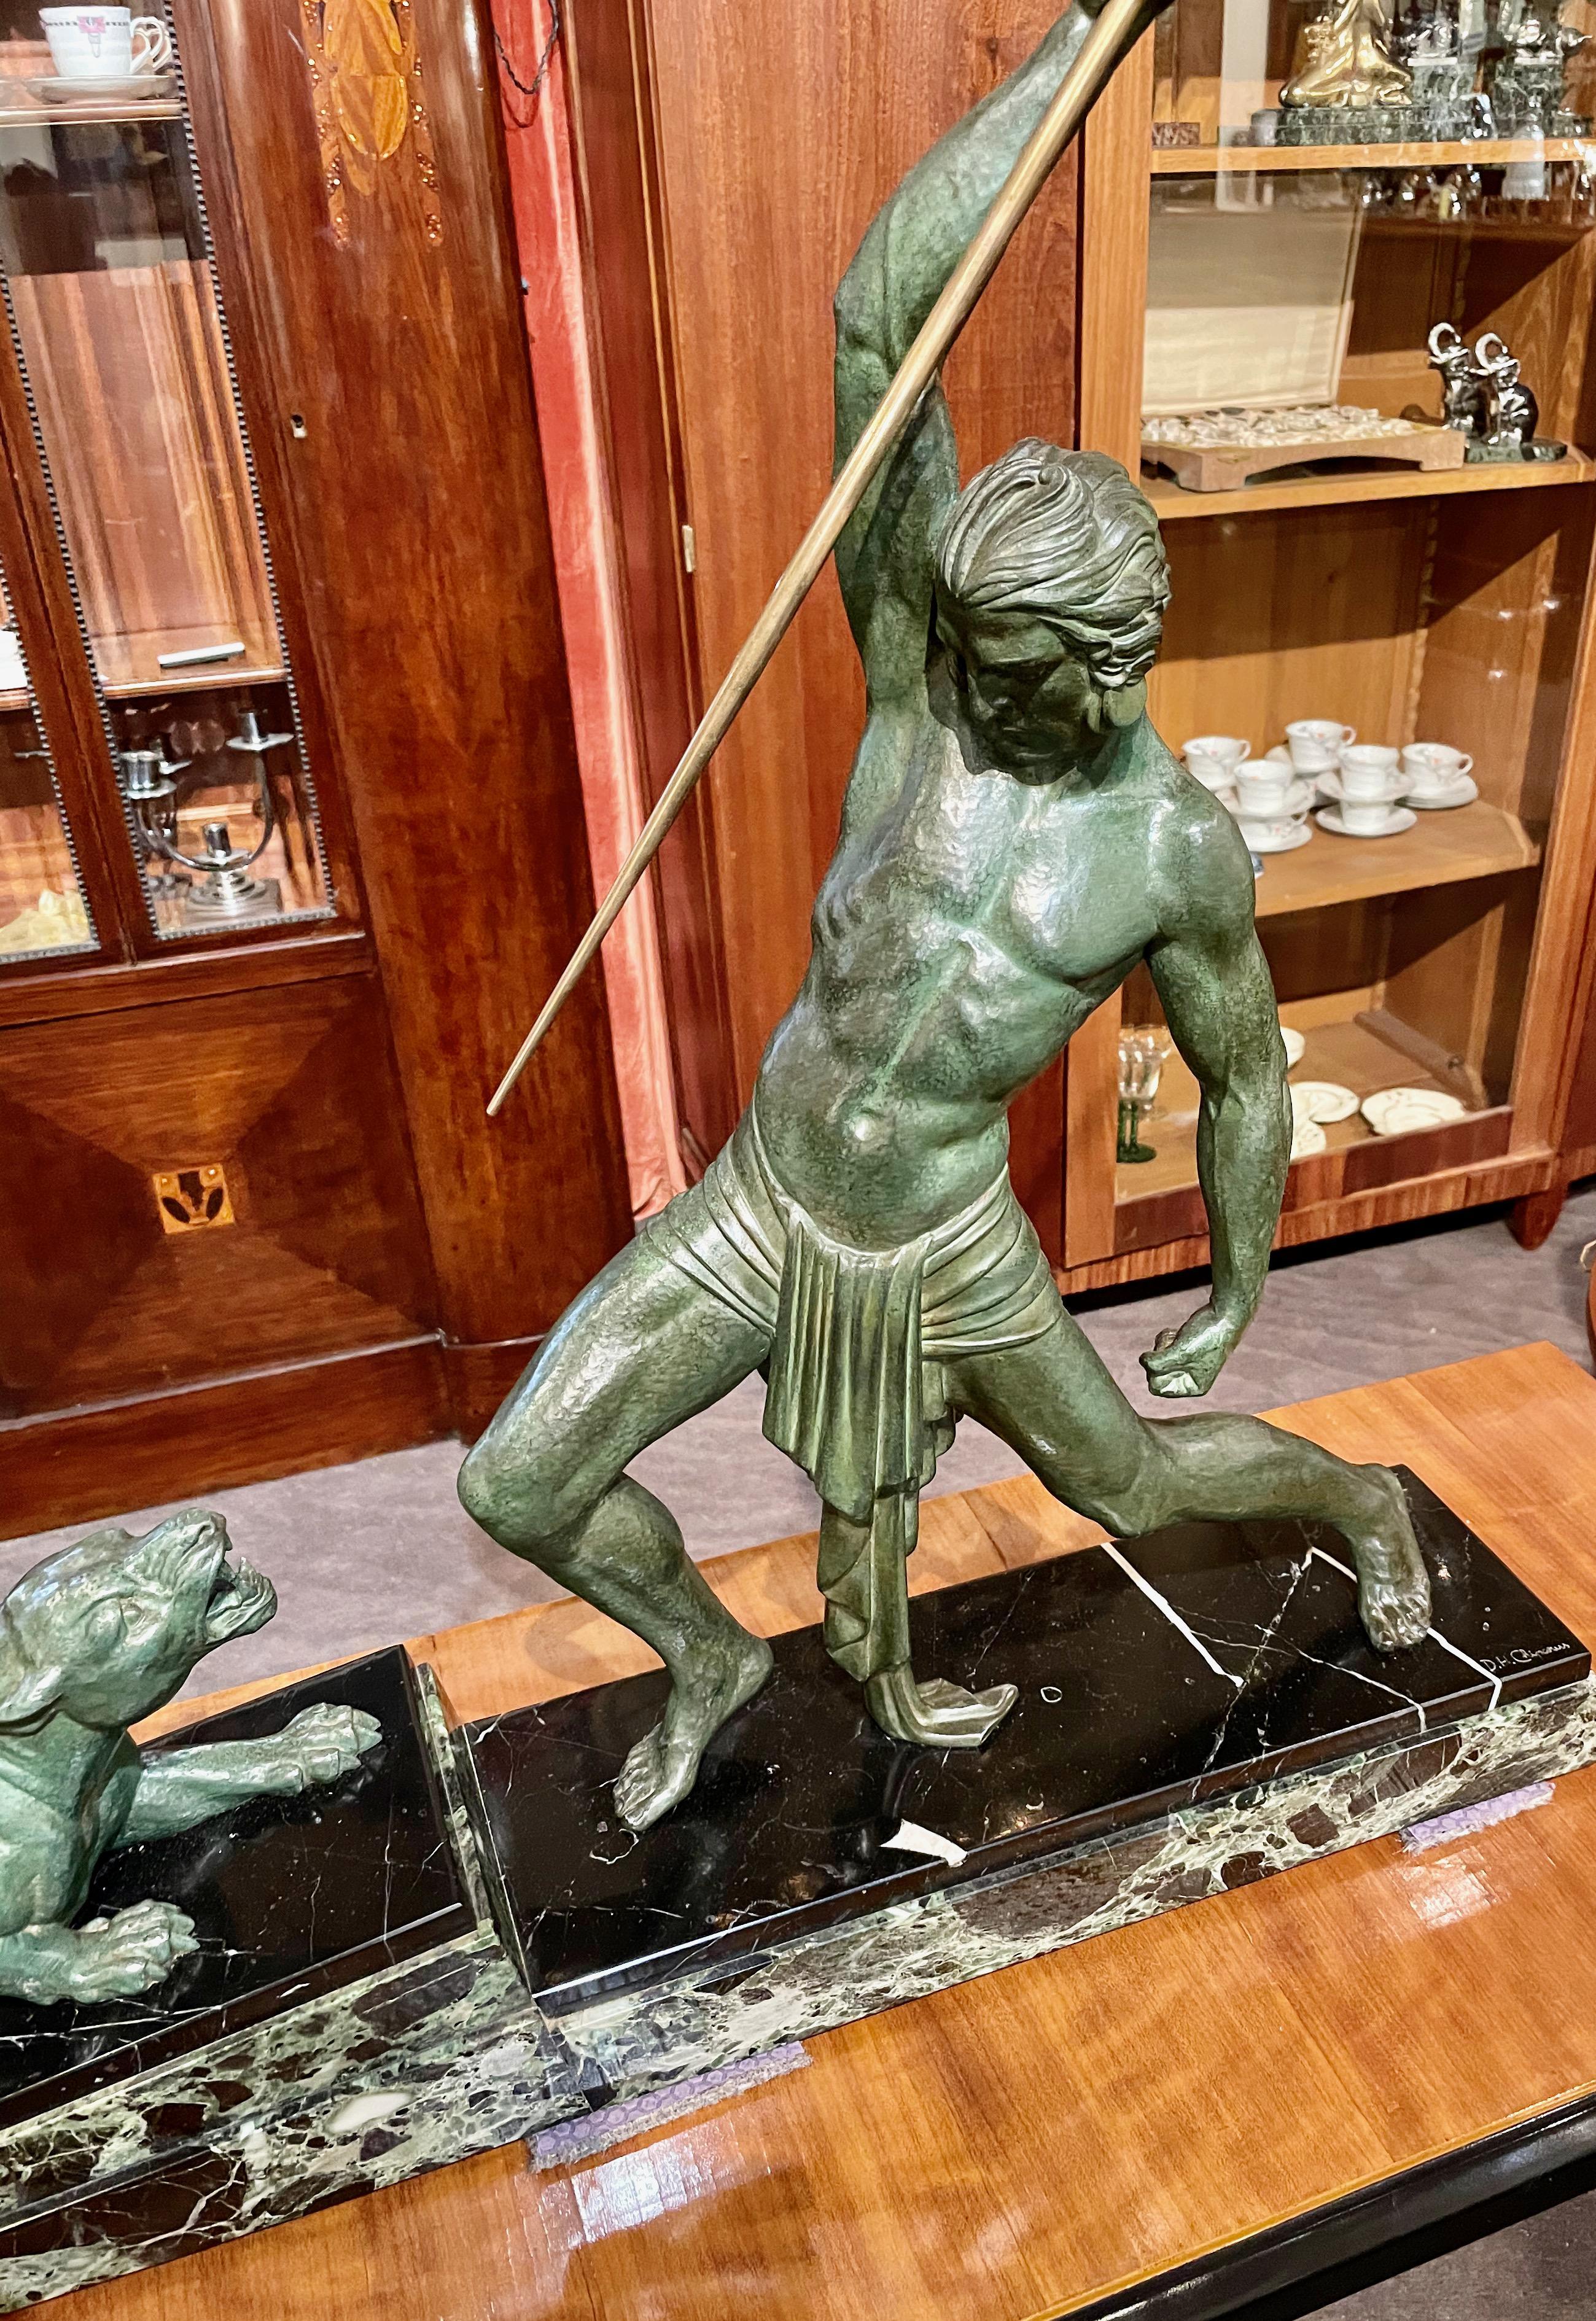 Large Art Deco sculpture of hunter and panther (or lion) by the famous sculptor Demetre H. Chiparus. The Art metal sculpture has a beautiful green verdigris patina and stands on an angled green/white/black multi-color marble base. It is in excellent